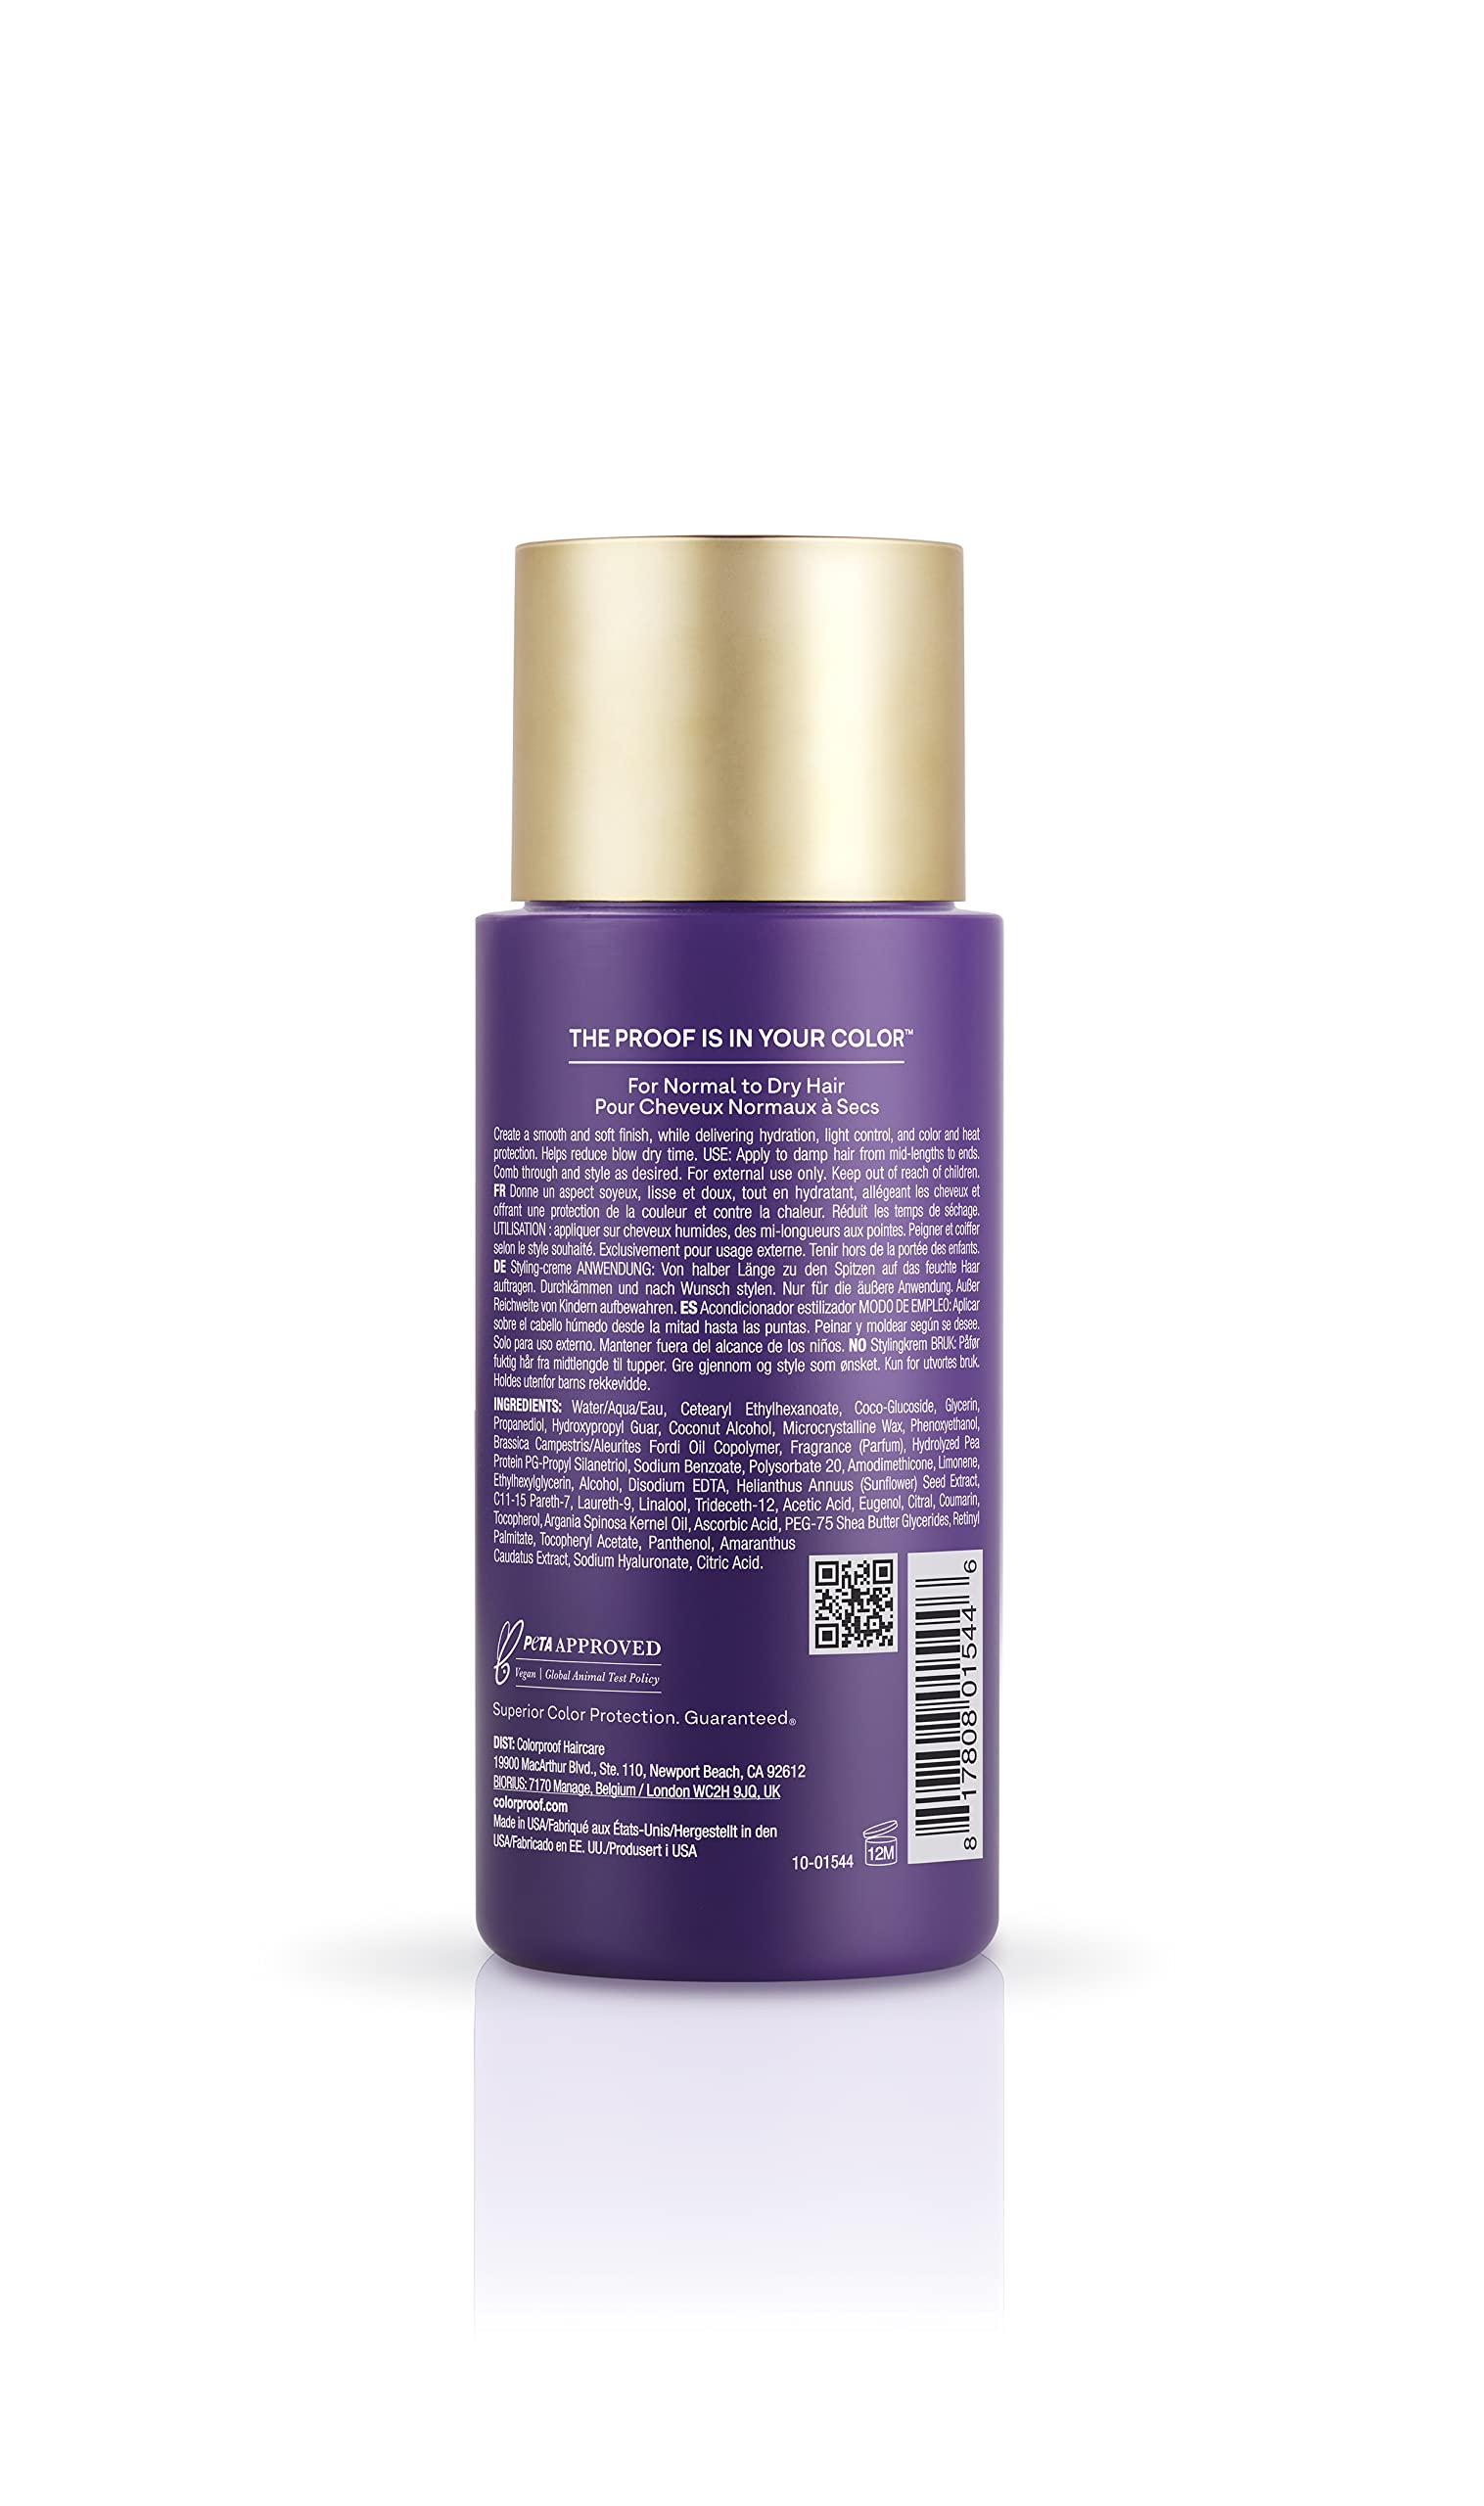 Colorproof Moisture Styling Crème 6.7oz - Leave-in Treatment For Dry, Color-Treated Hair, Smooths & Softens, Sulfate-Free, Vegan